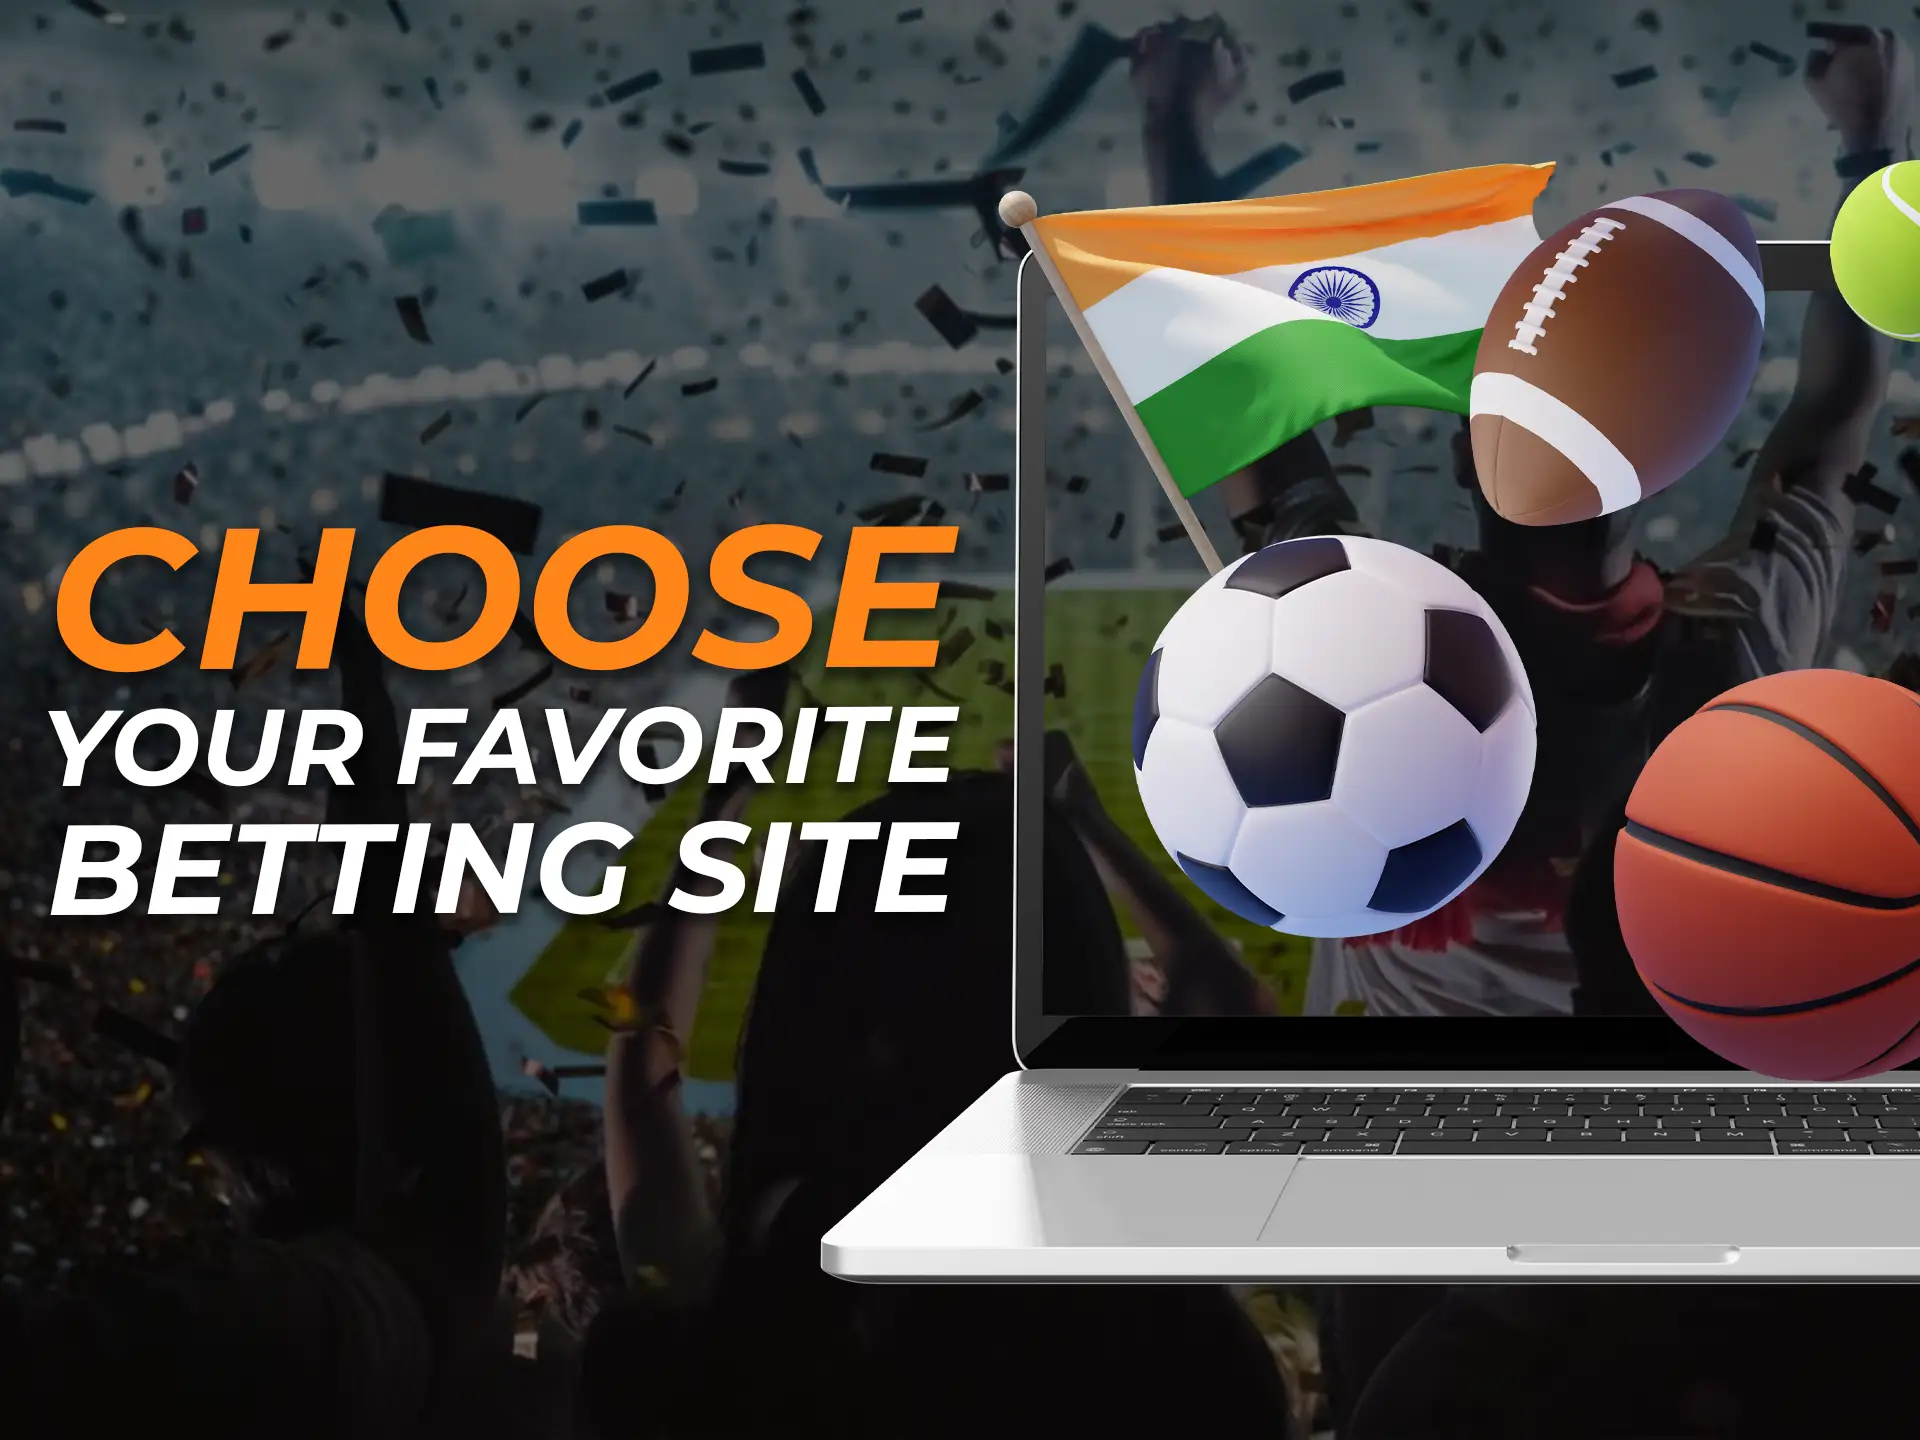 We suggest choosing your favorite betting site among Indian bookmakers.